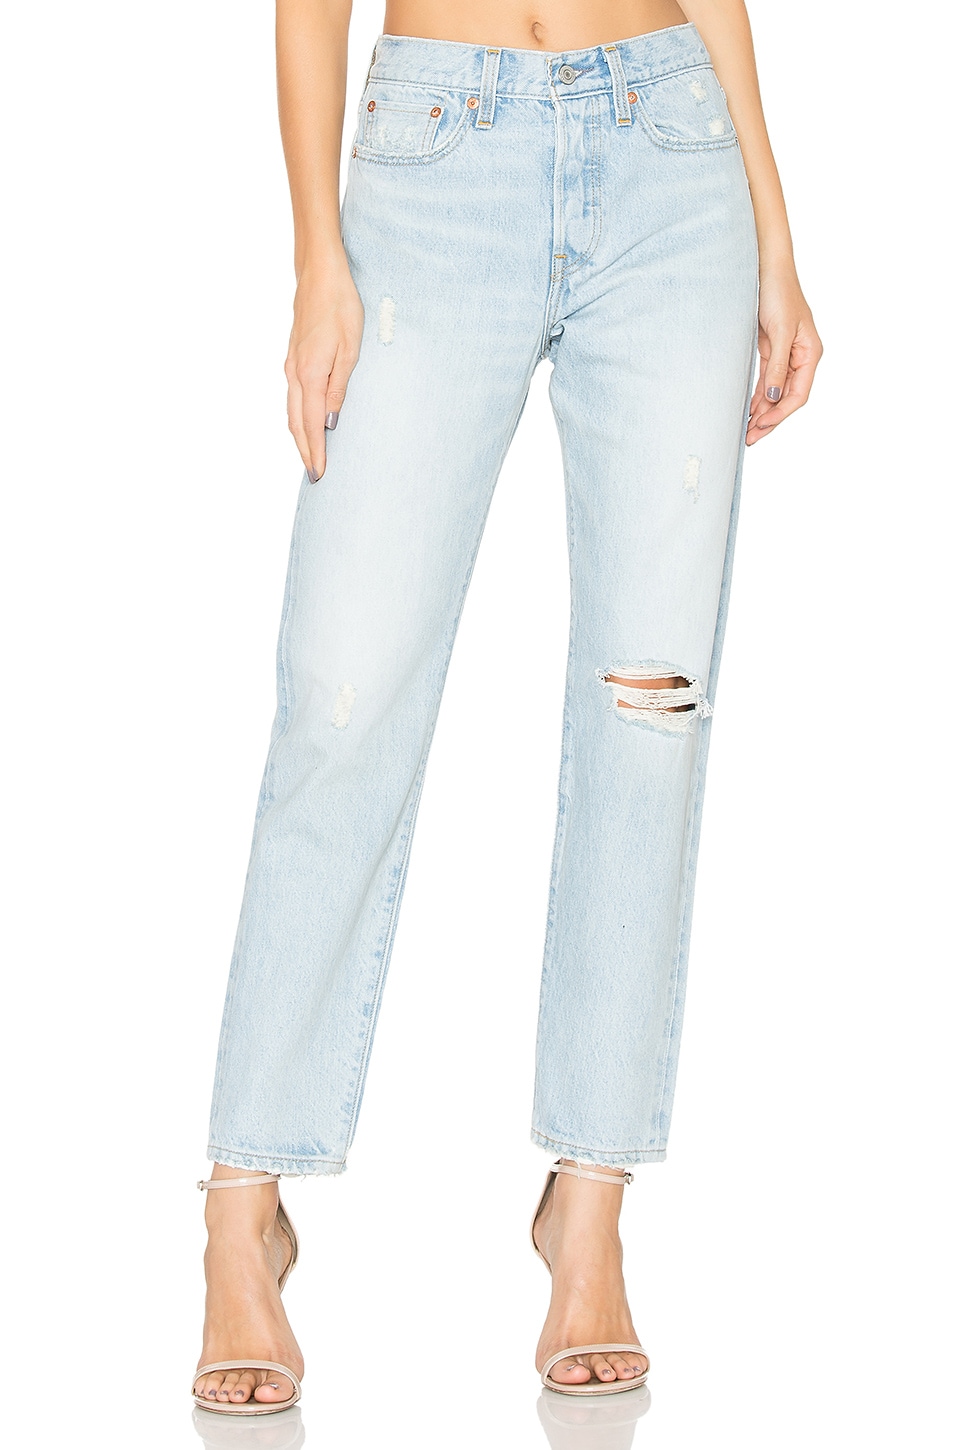 Womans Jeans Levis 711 Skinny Jeans In Love Indigo